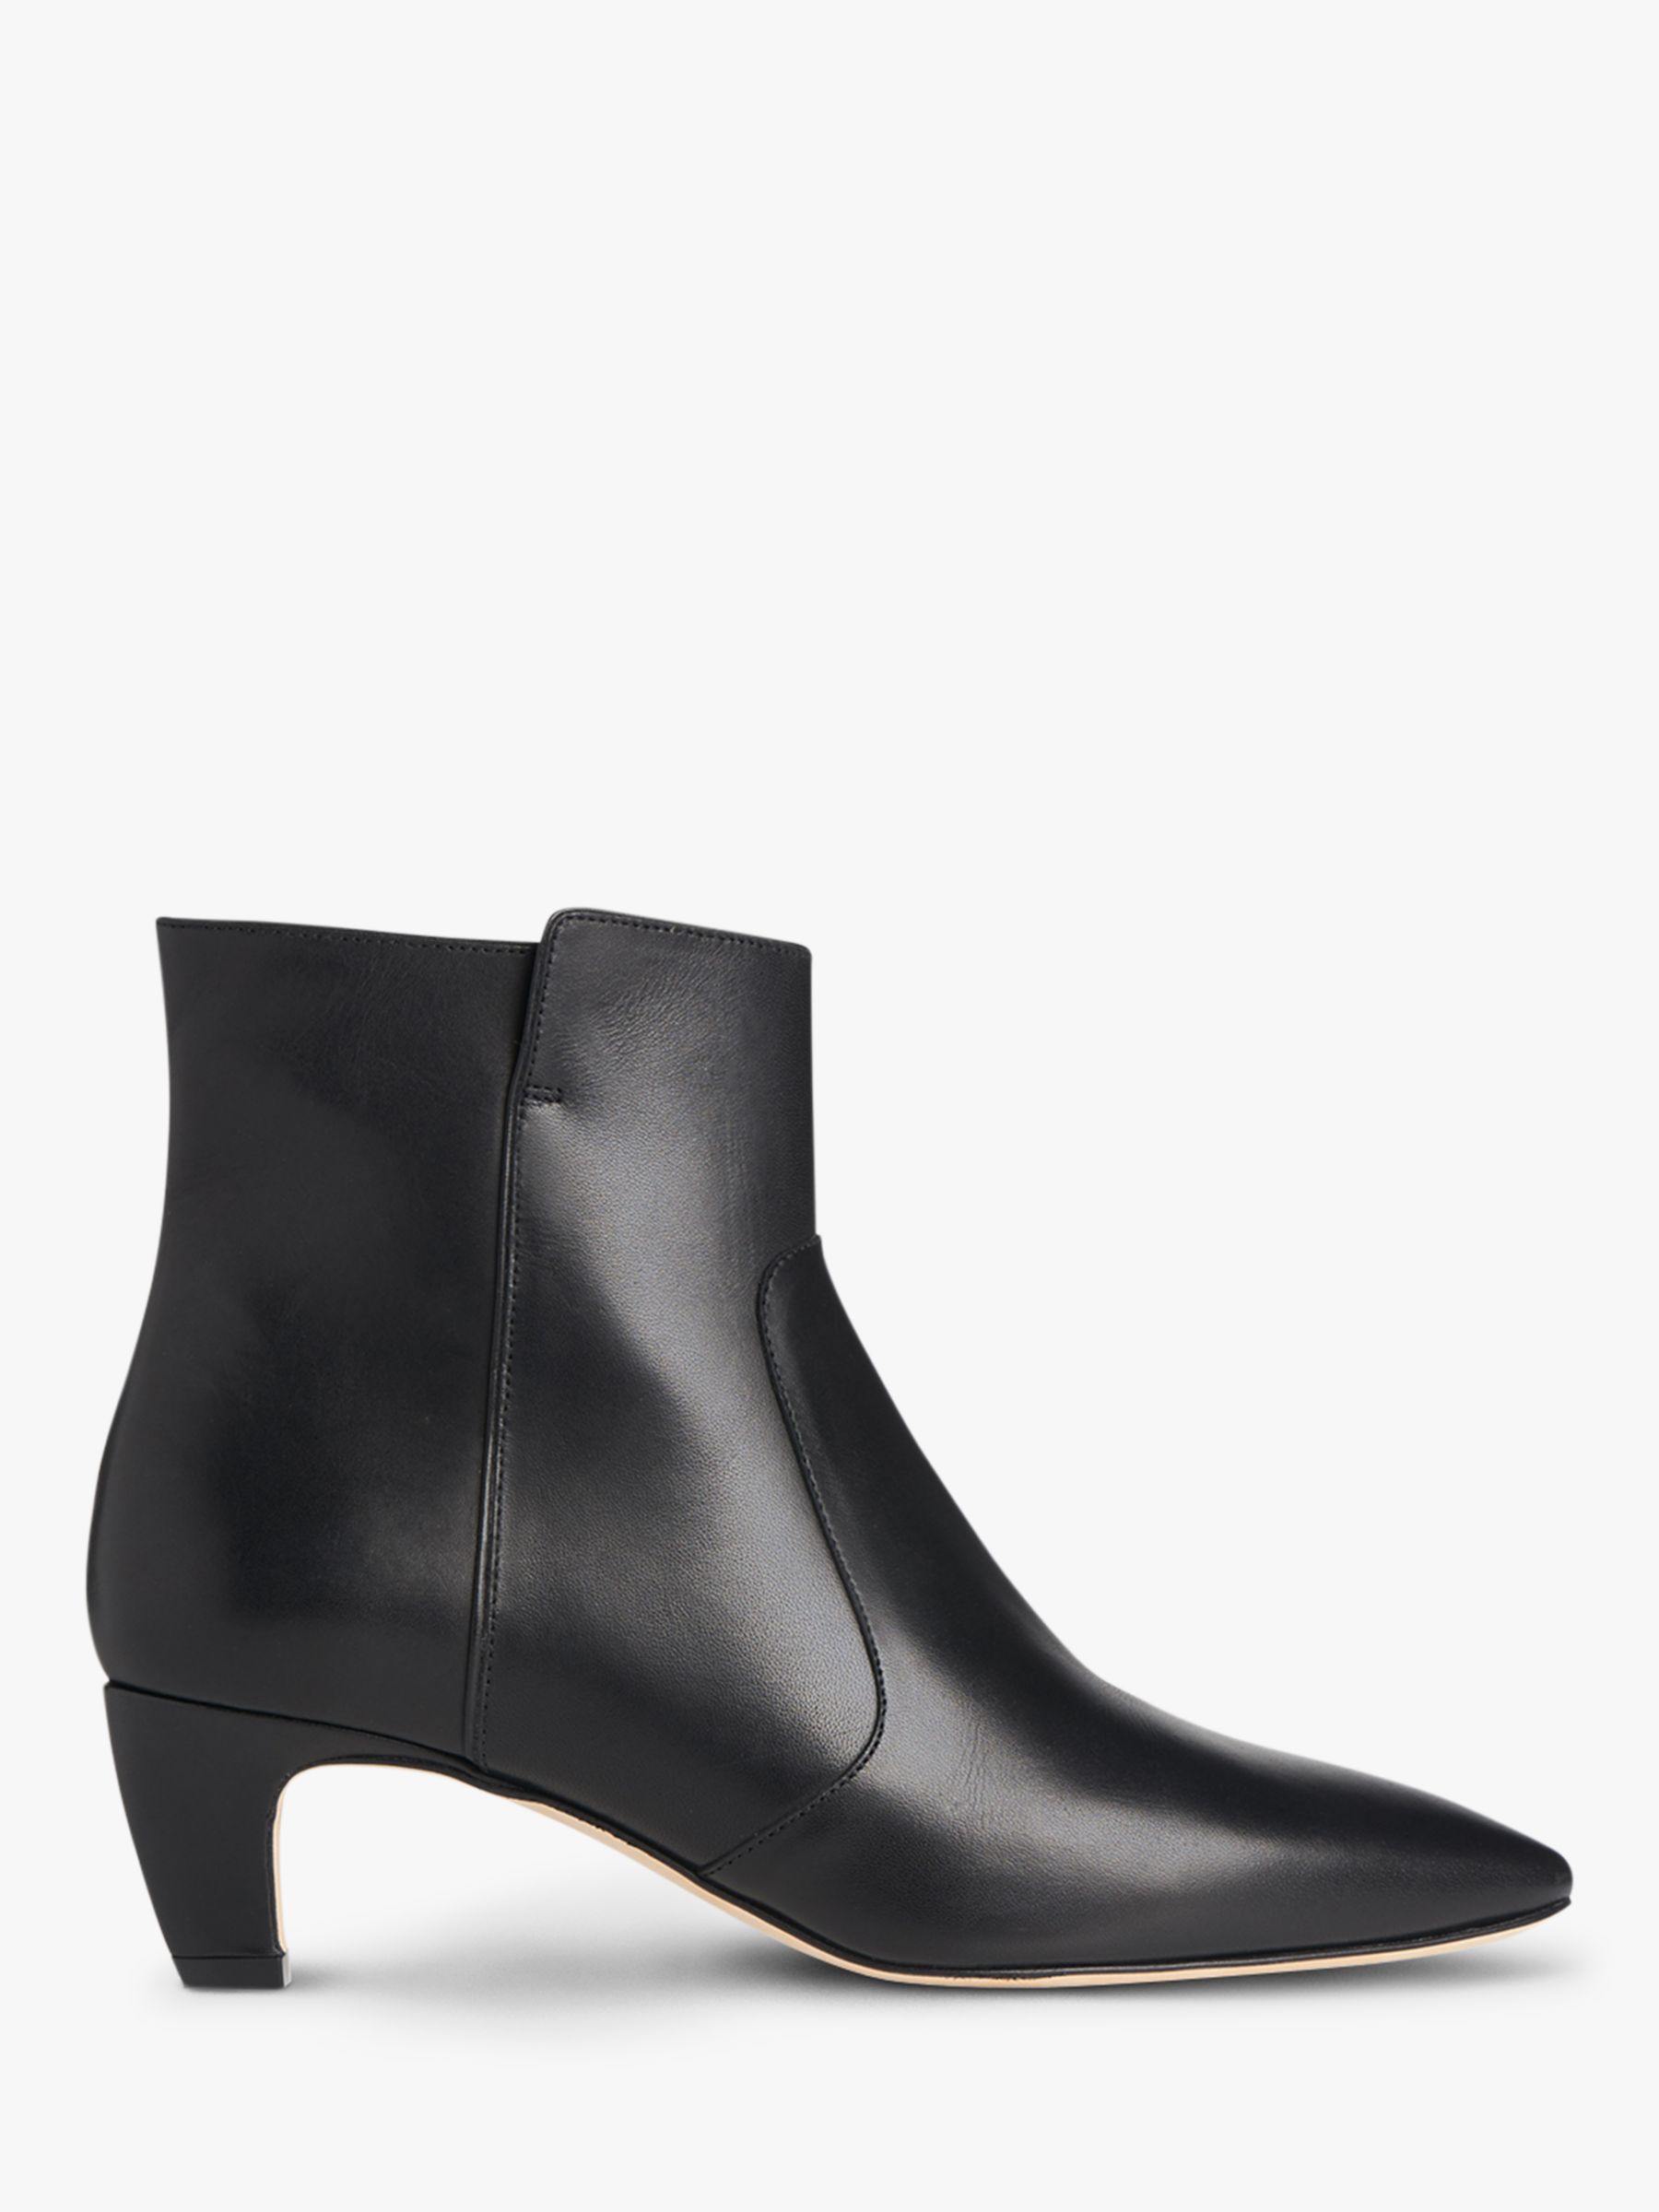 L.K.Bennett Meadow Pointed Ankle Boots